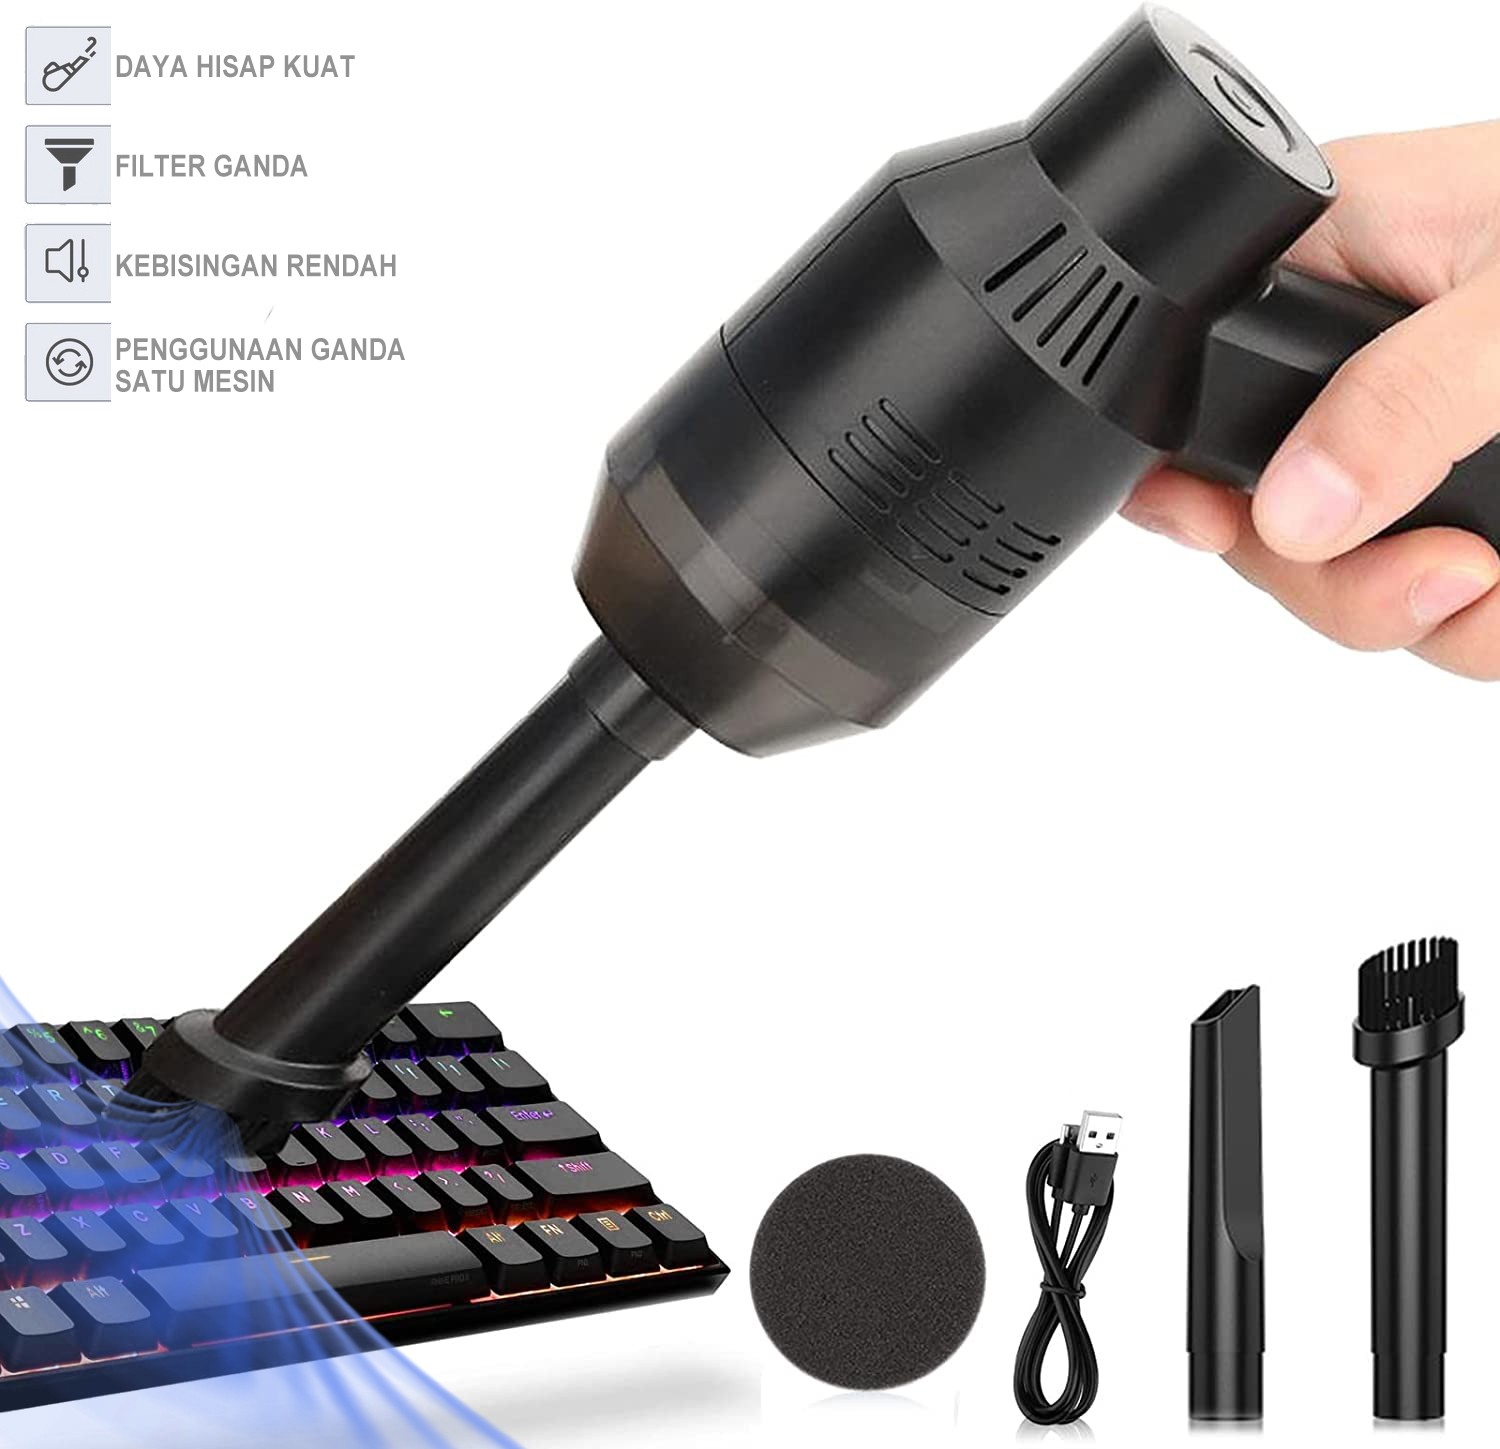 Cordless Vacuum Cleaner Keyboard Vacuum Cleaner Portable Car Vacuum Cleaner Getting Dust and Crumbs Off Computer,Car Interior & Other Crevices